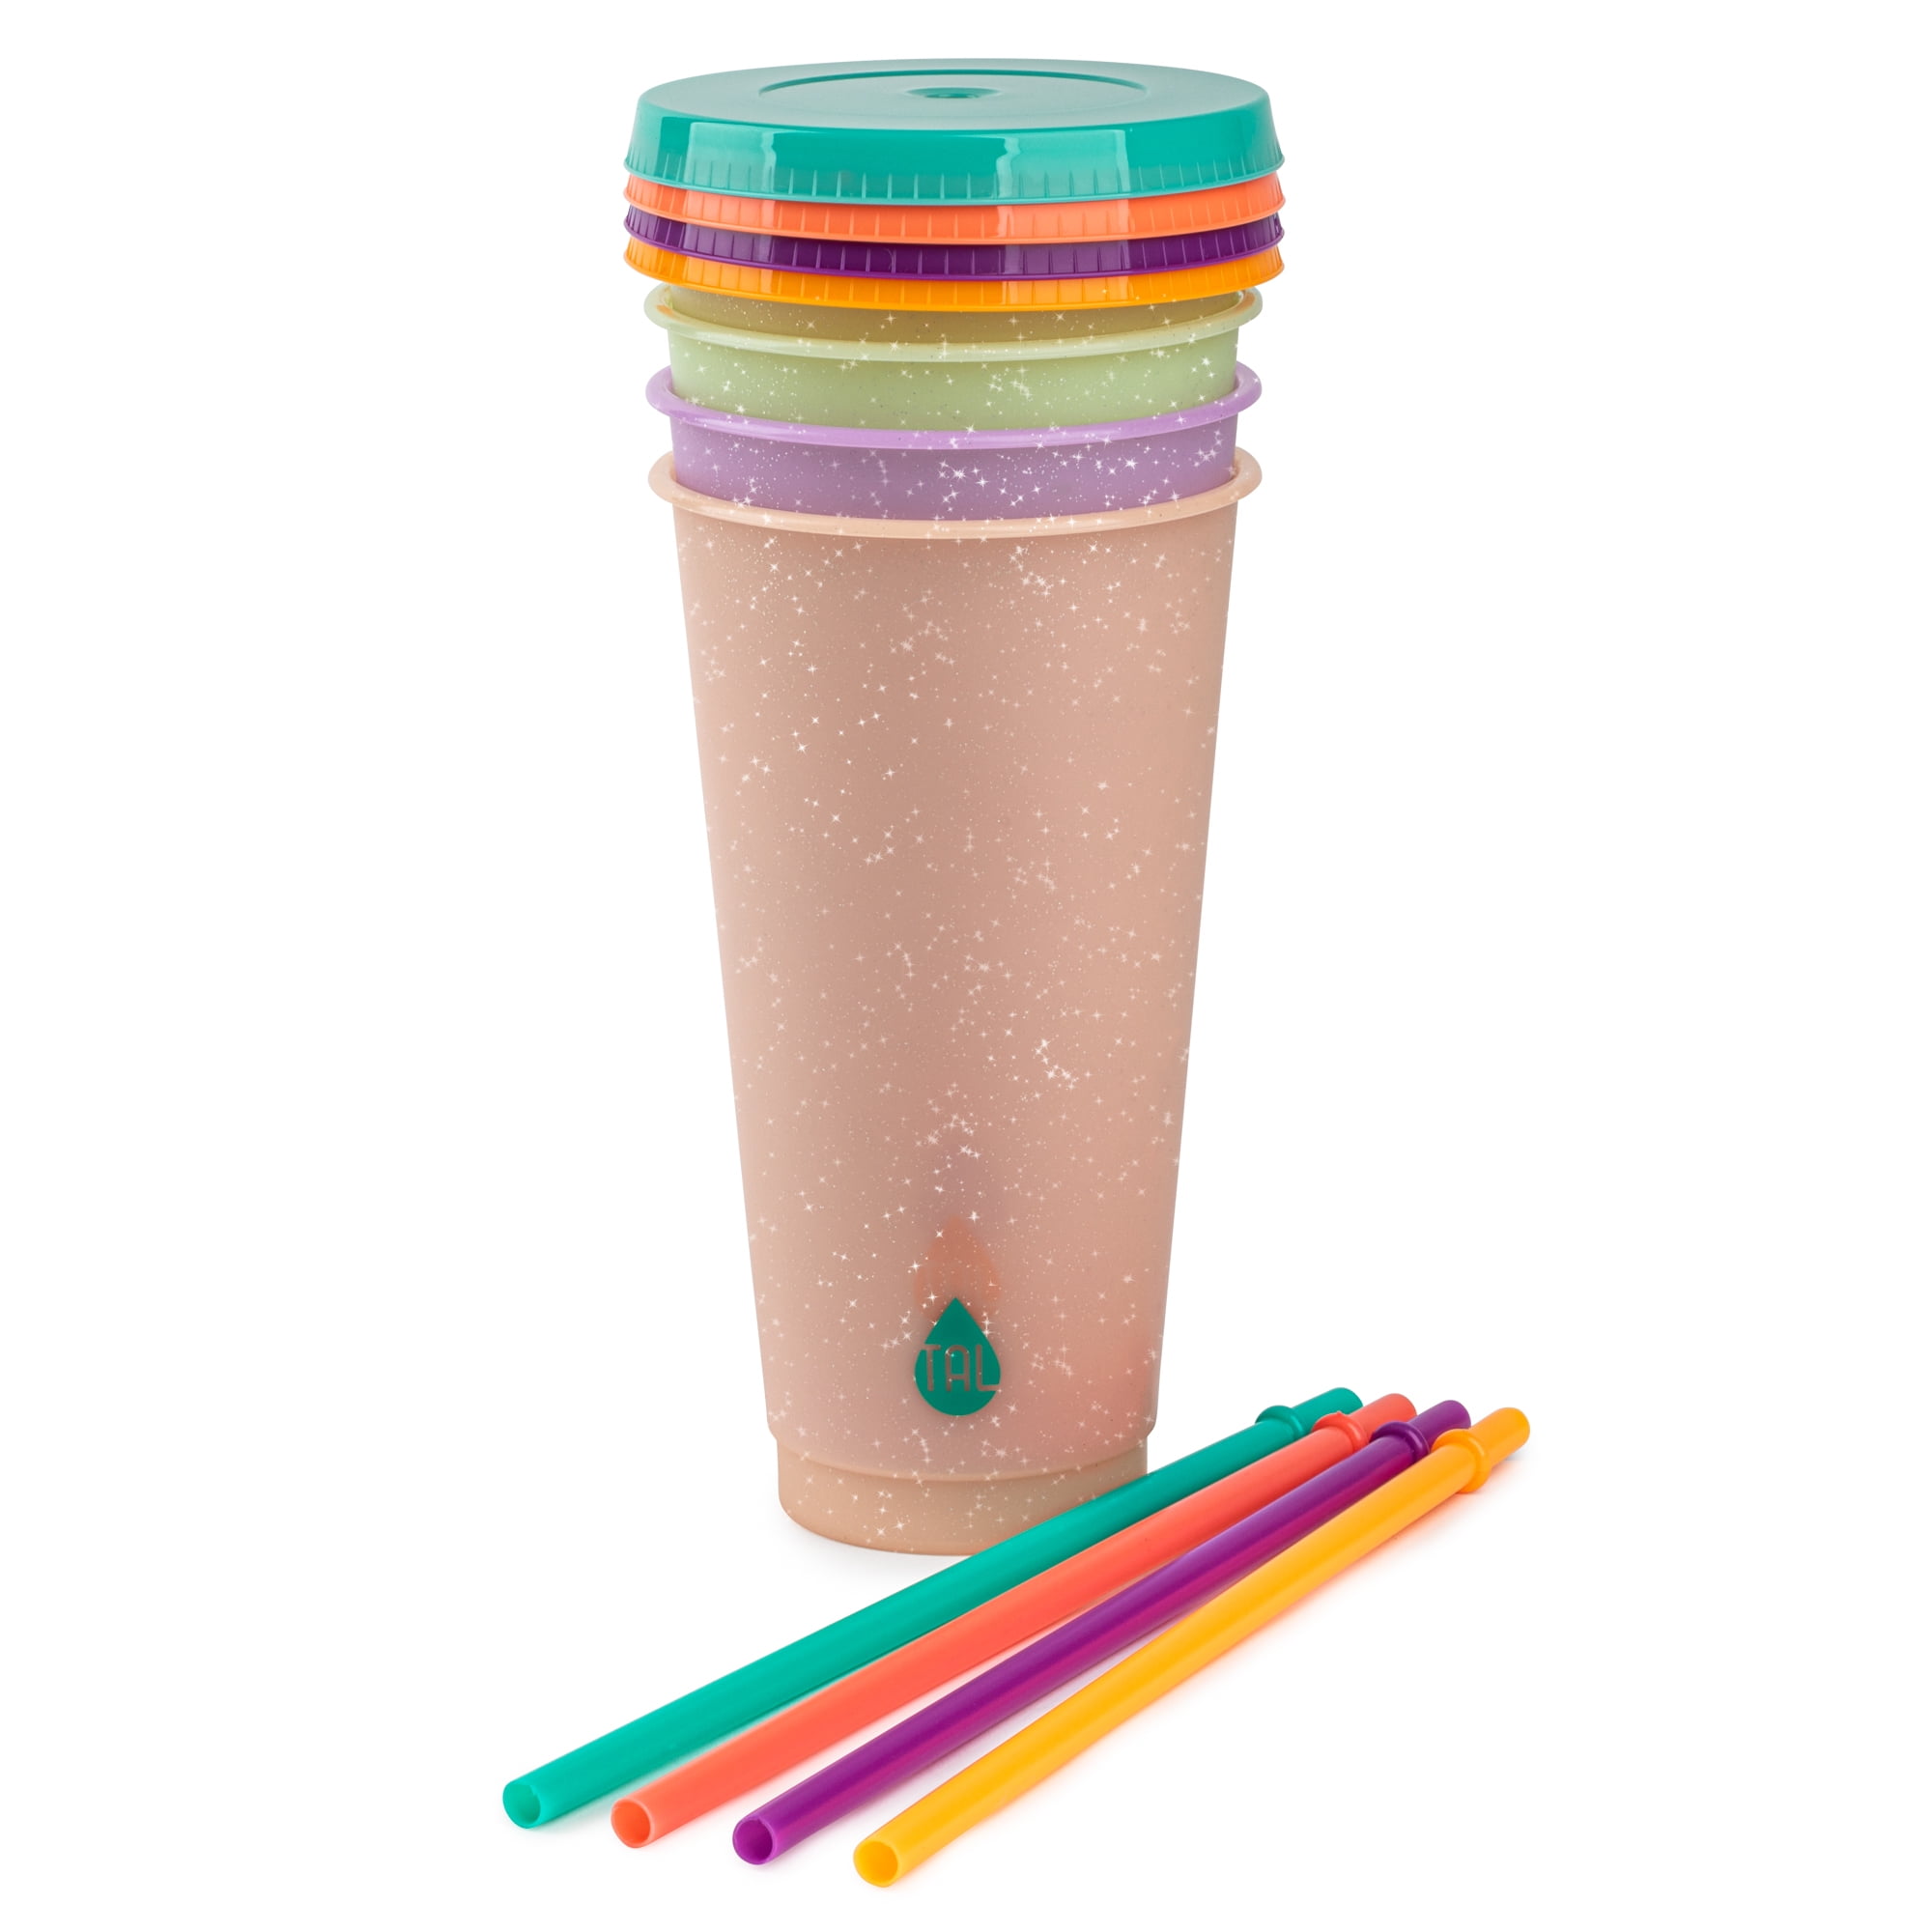  TAL Mutlicolor Reusable Color Changing Tumbler & Straw